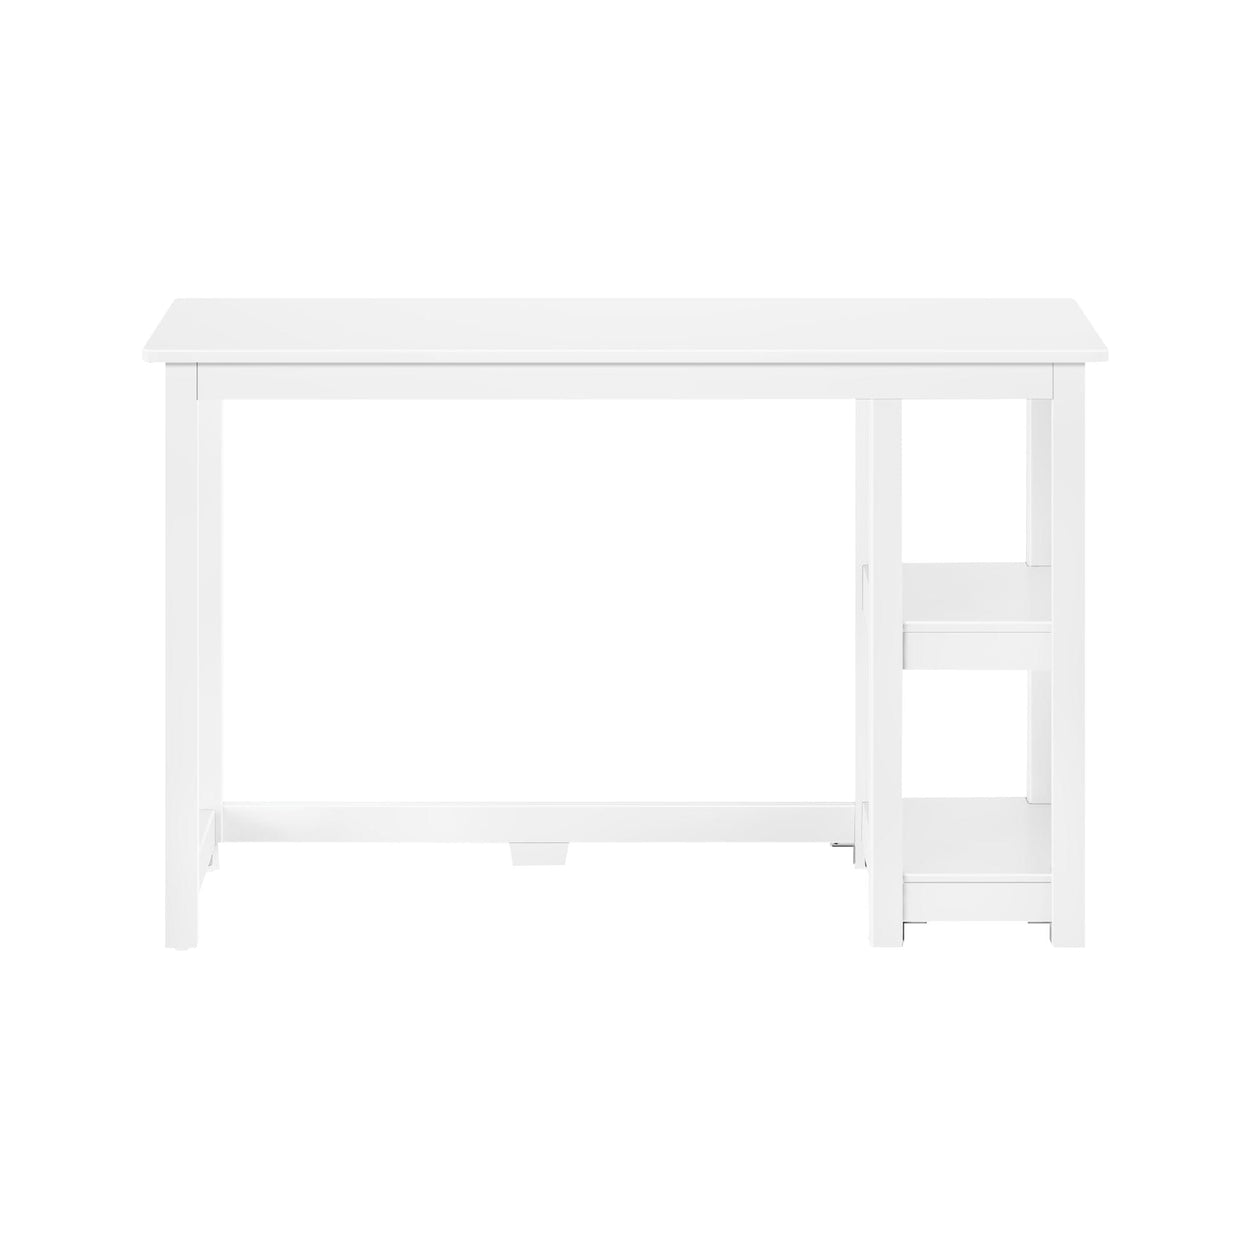 181205-002 : Furniture Desk with Bookshelves - 47 inches, White